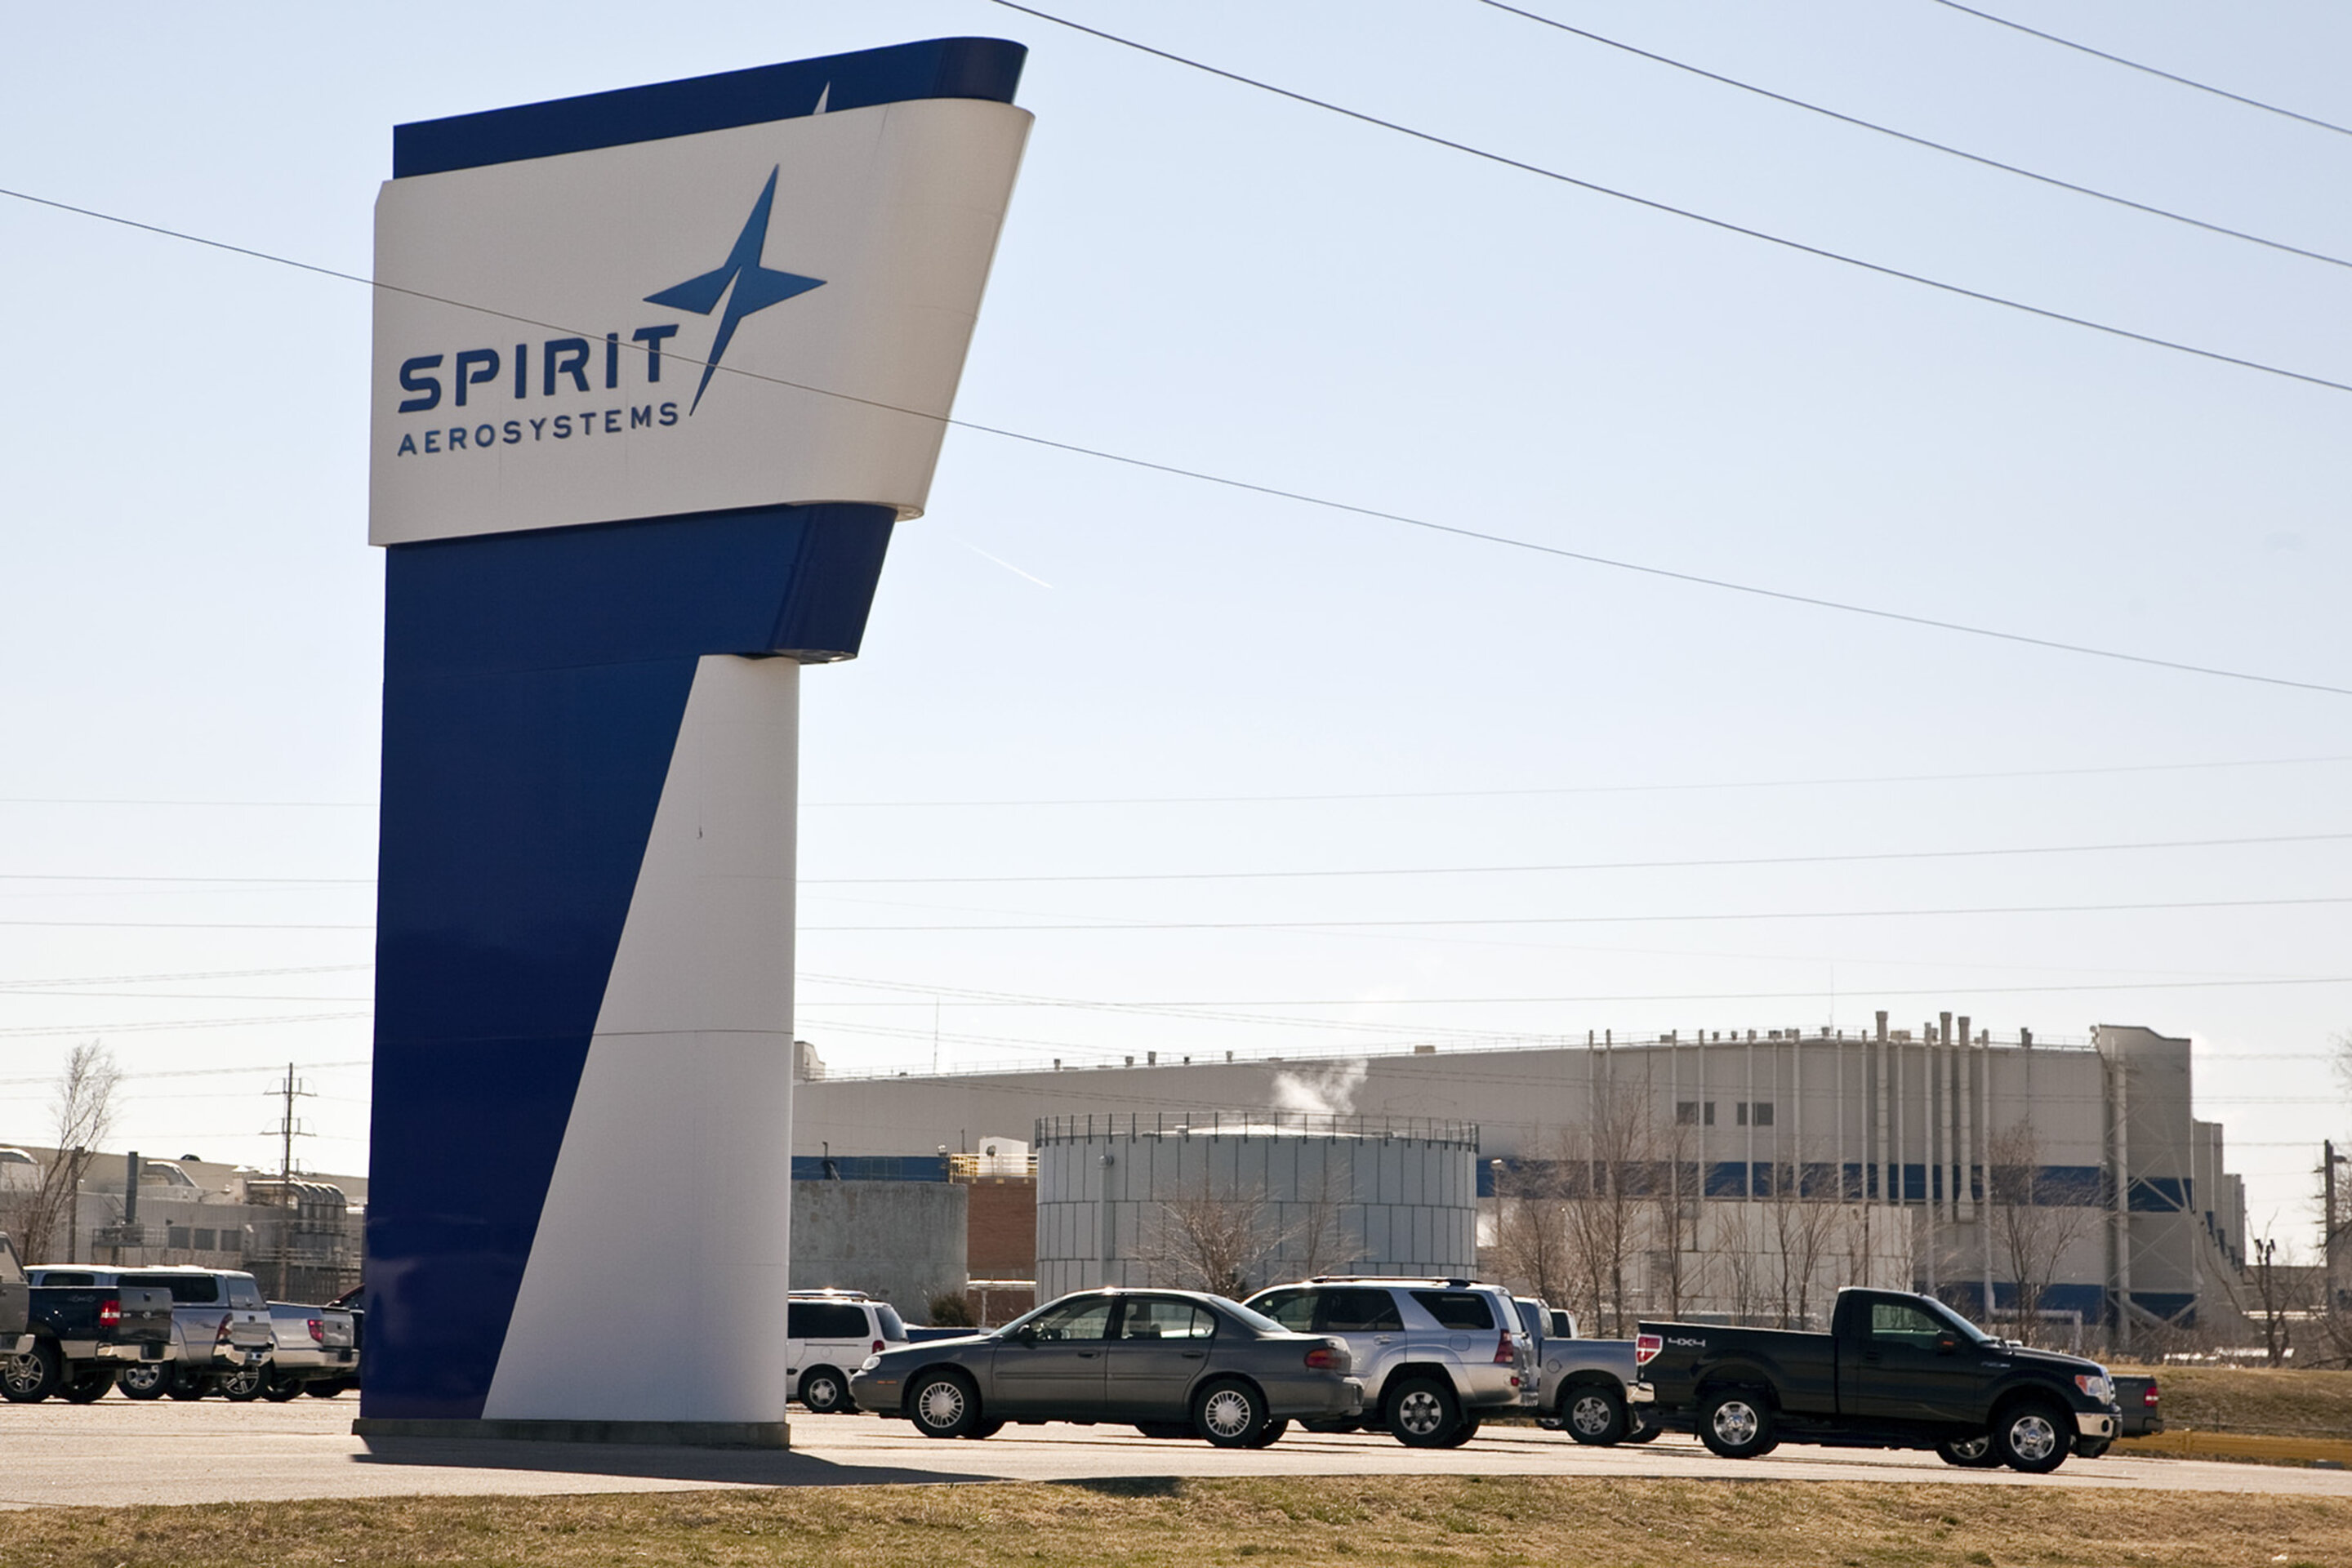 Spirit Aerosystems aware of quality issue on some fuselage units for 737